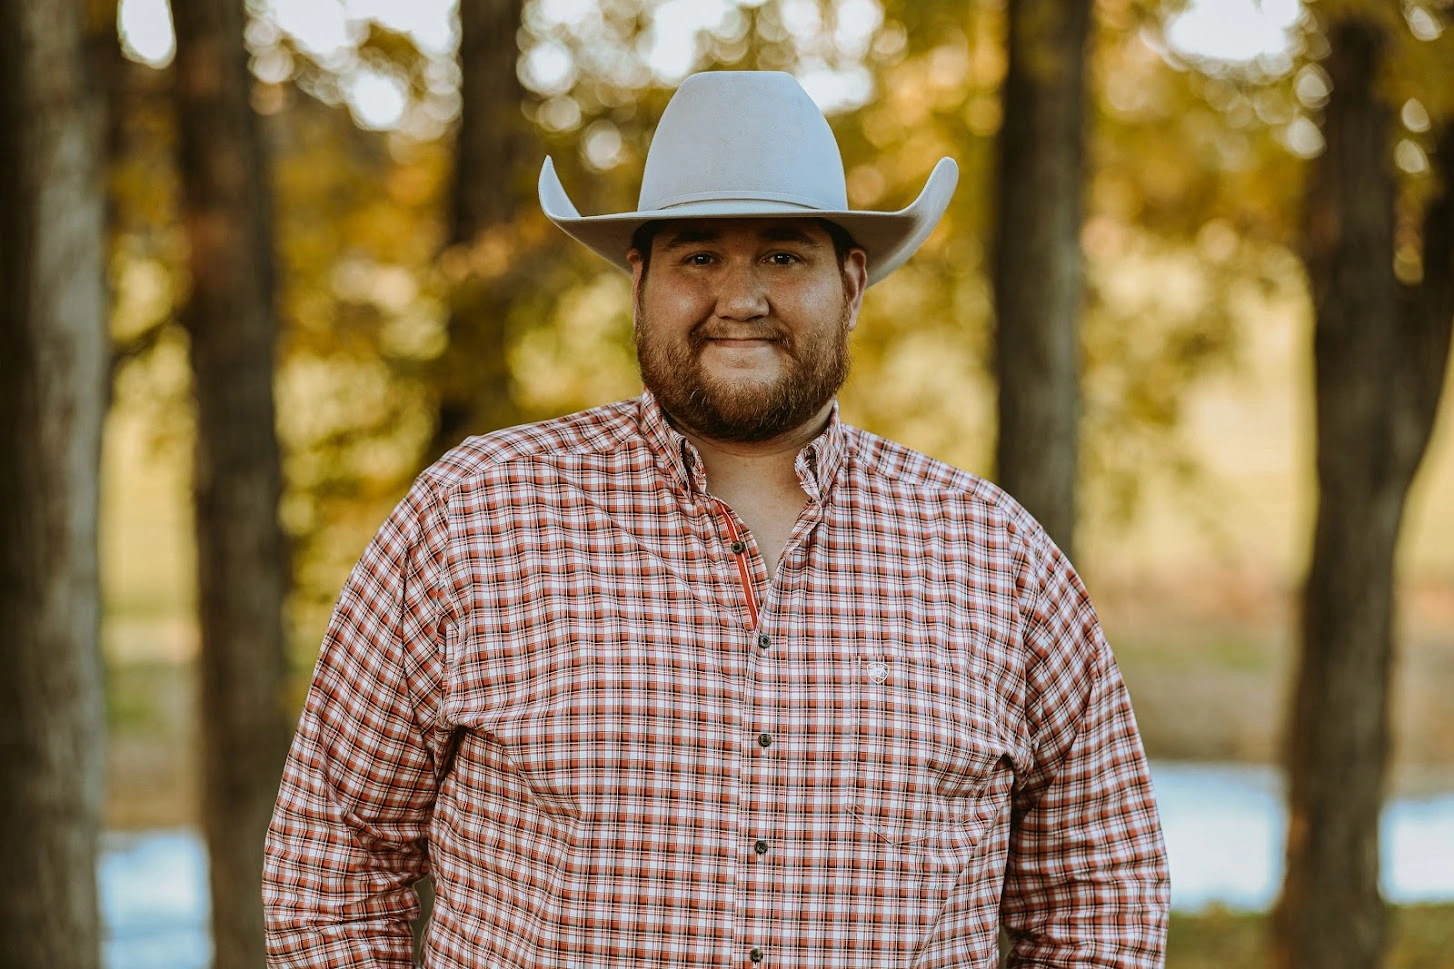 Austin Neahring wearing a white cowboy hat and a red, plaid buttoned up shirt